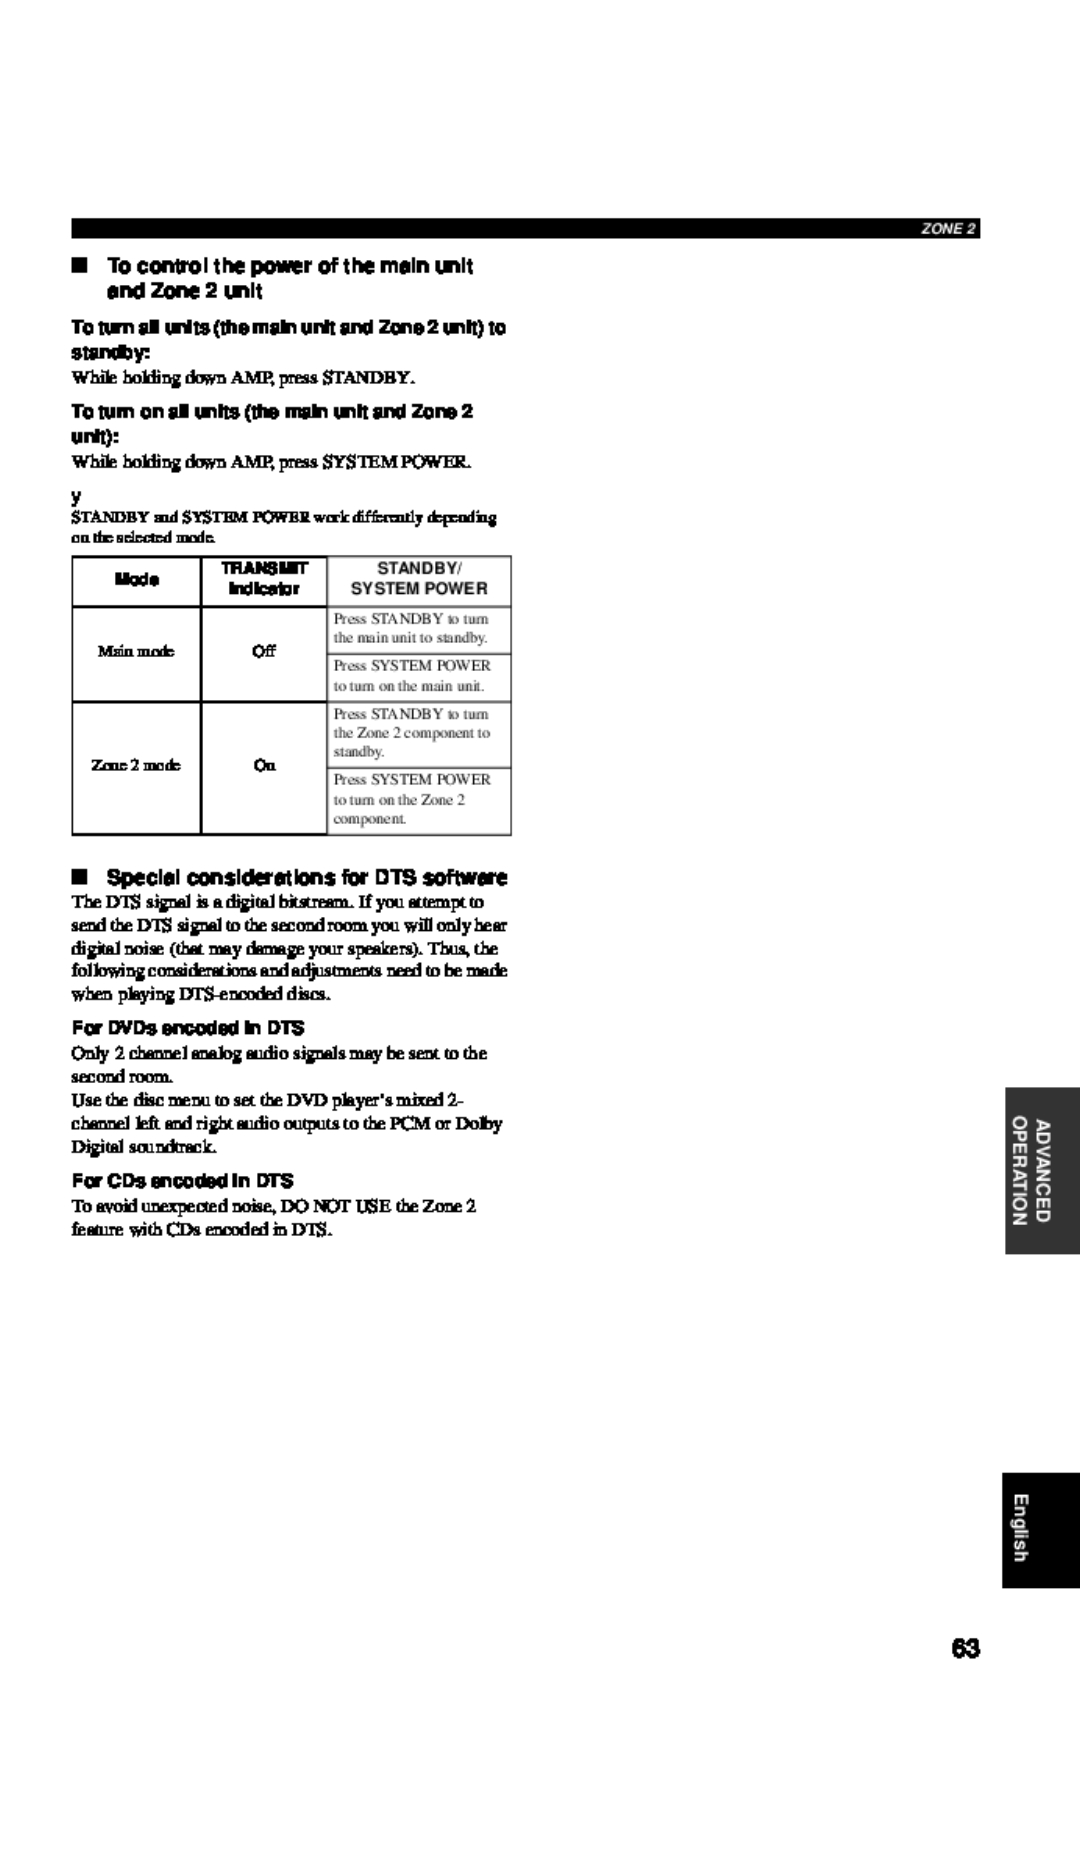 Yamaha RX-V557 owner manual Special considerations for DTS software, For DVDs encoded in DTS, For CDs encoded in DTS 